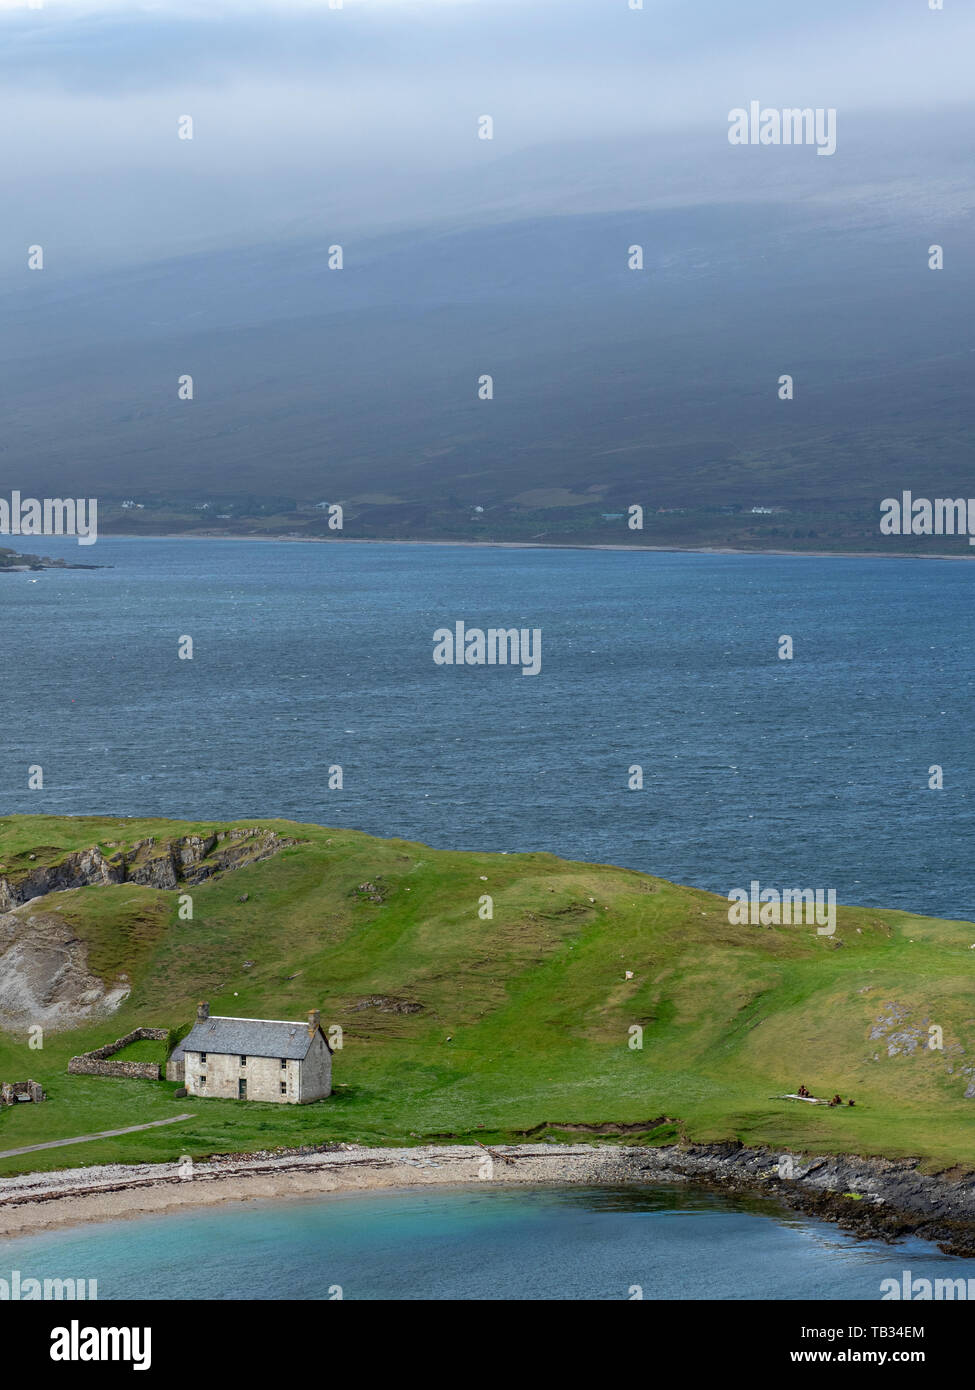 View of the old Ferry House, Harbour and Lime Kilns,  Ard Neackie Peninsula on Loch Eriboll, Sutherland, Scottish Highlands Stock Photo